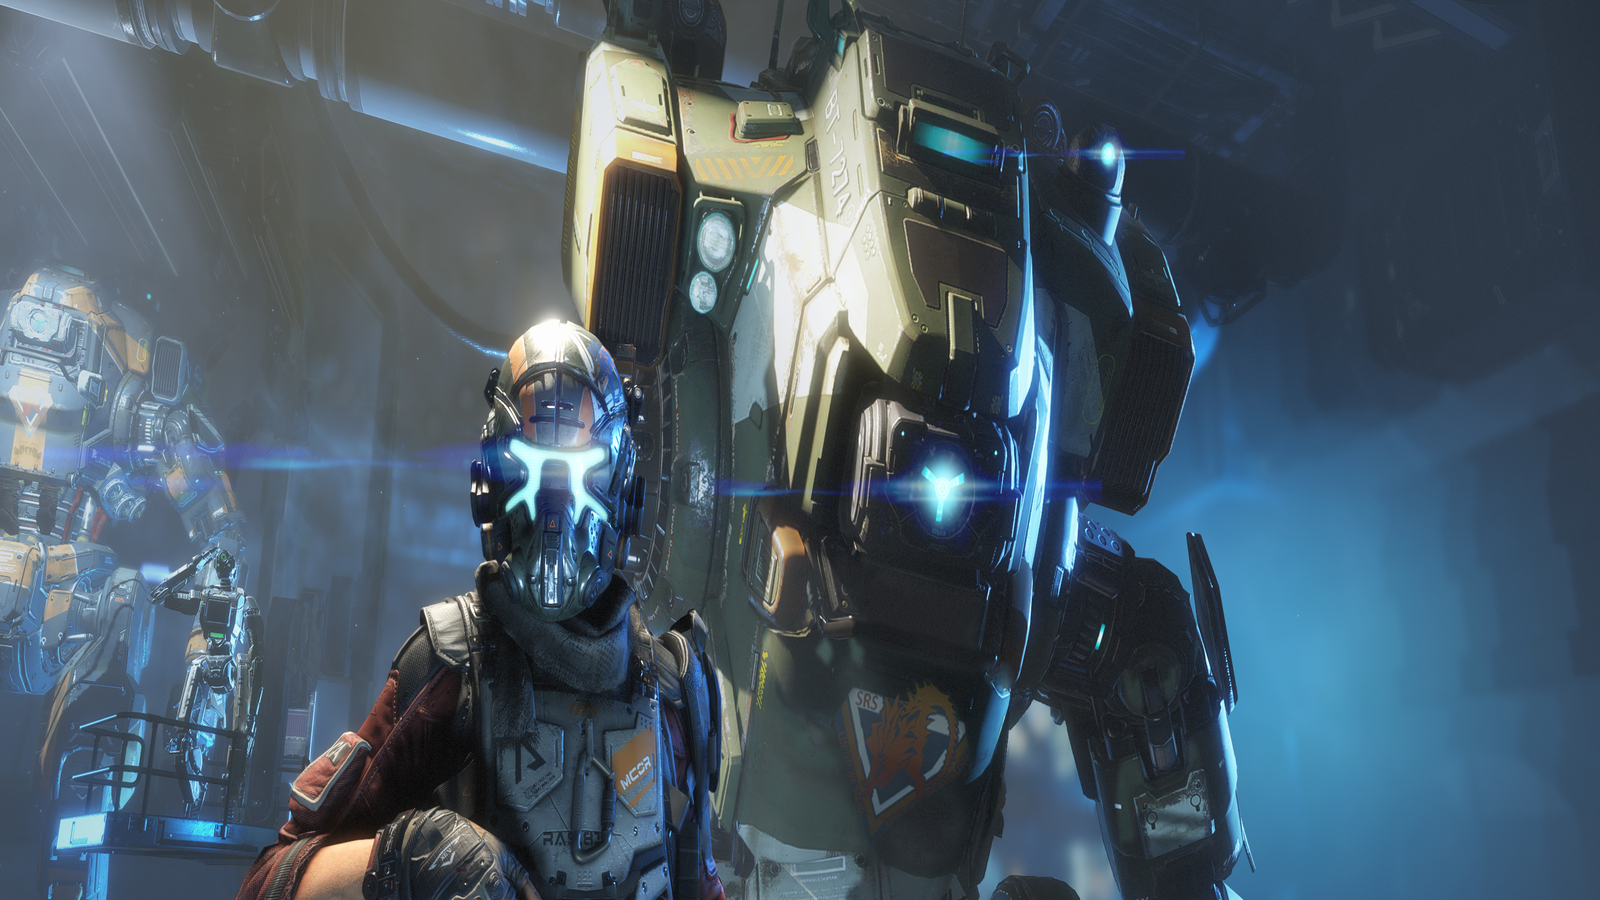 Titanfall 2 review: Prepare for more mech-dropping, wall-running action